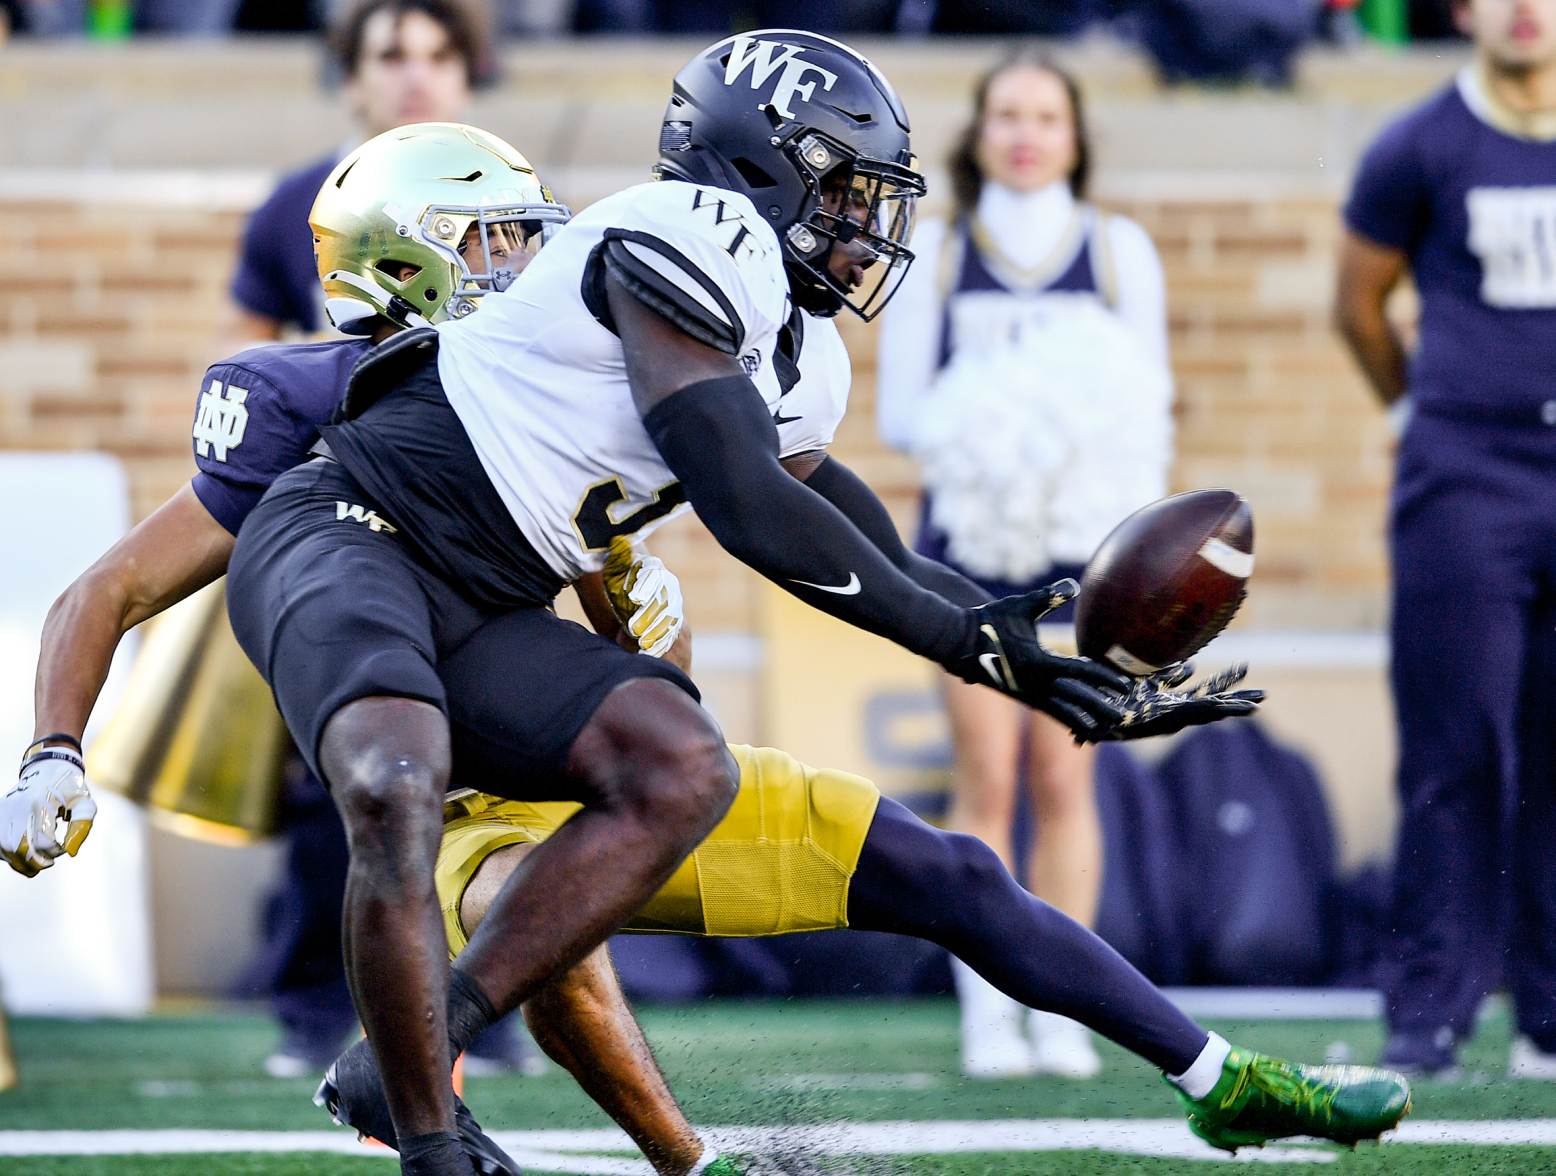 Nov 18, 2023; South Bend, Indiana, USA; Wake Forest Demon Deacons safety Malik Mustapha (3) breaks up a pass intended for Notre Dame Fighting Irish wide receiver Jordan Faison (80) in the first quarter at Notre Dame Stadium. Credit: Matt Cashore-USA TODAY Sports